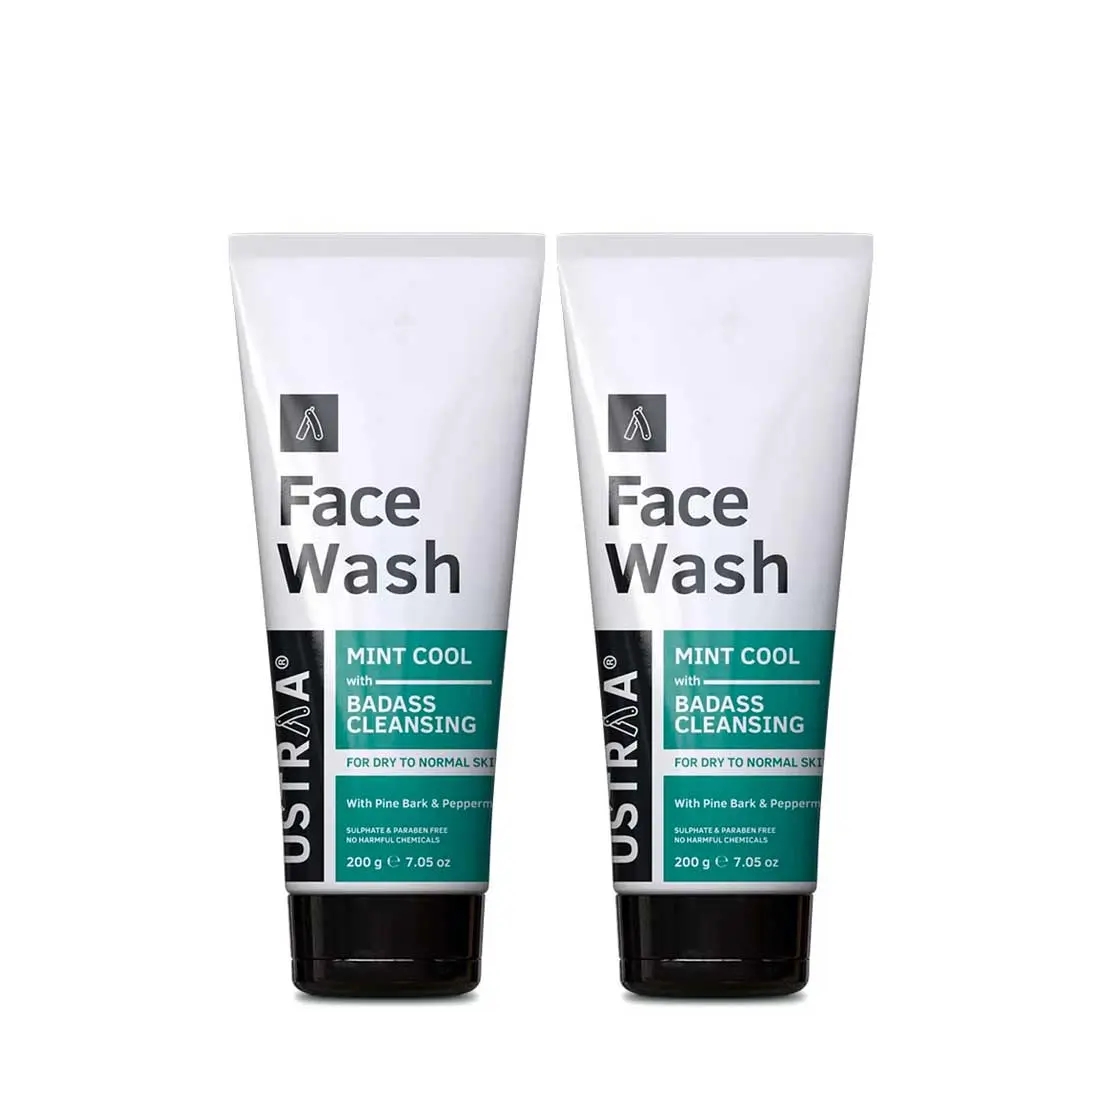 Face Wash - Dry Skin Set of 2  (Mint Cool) - 200g 